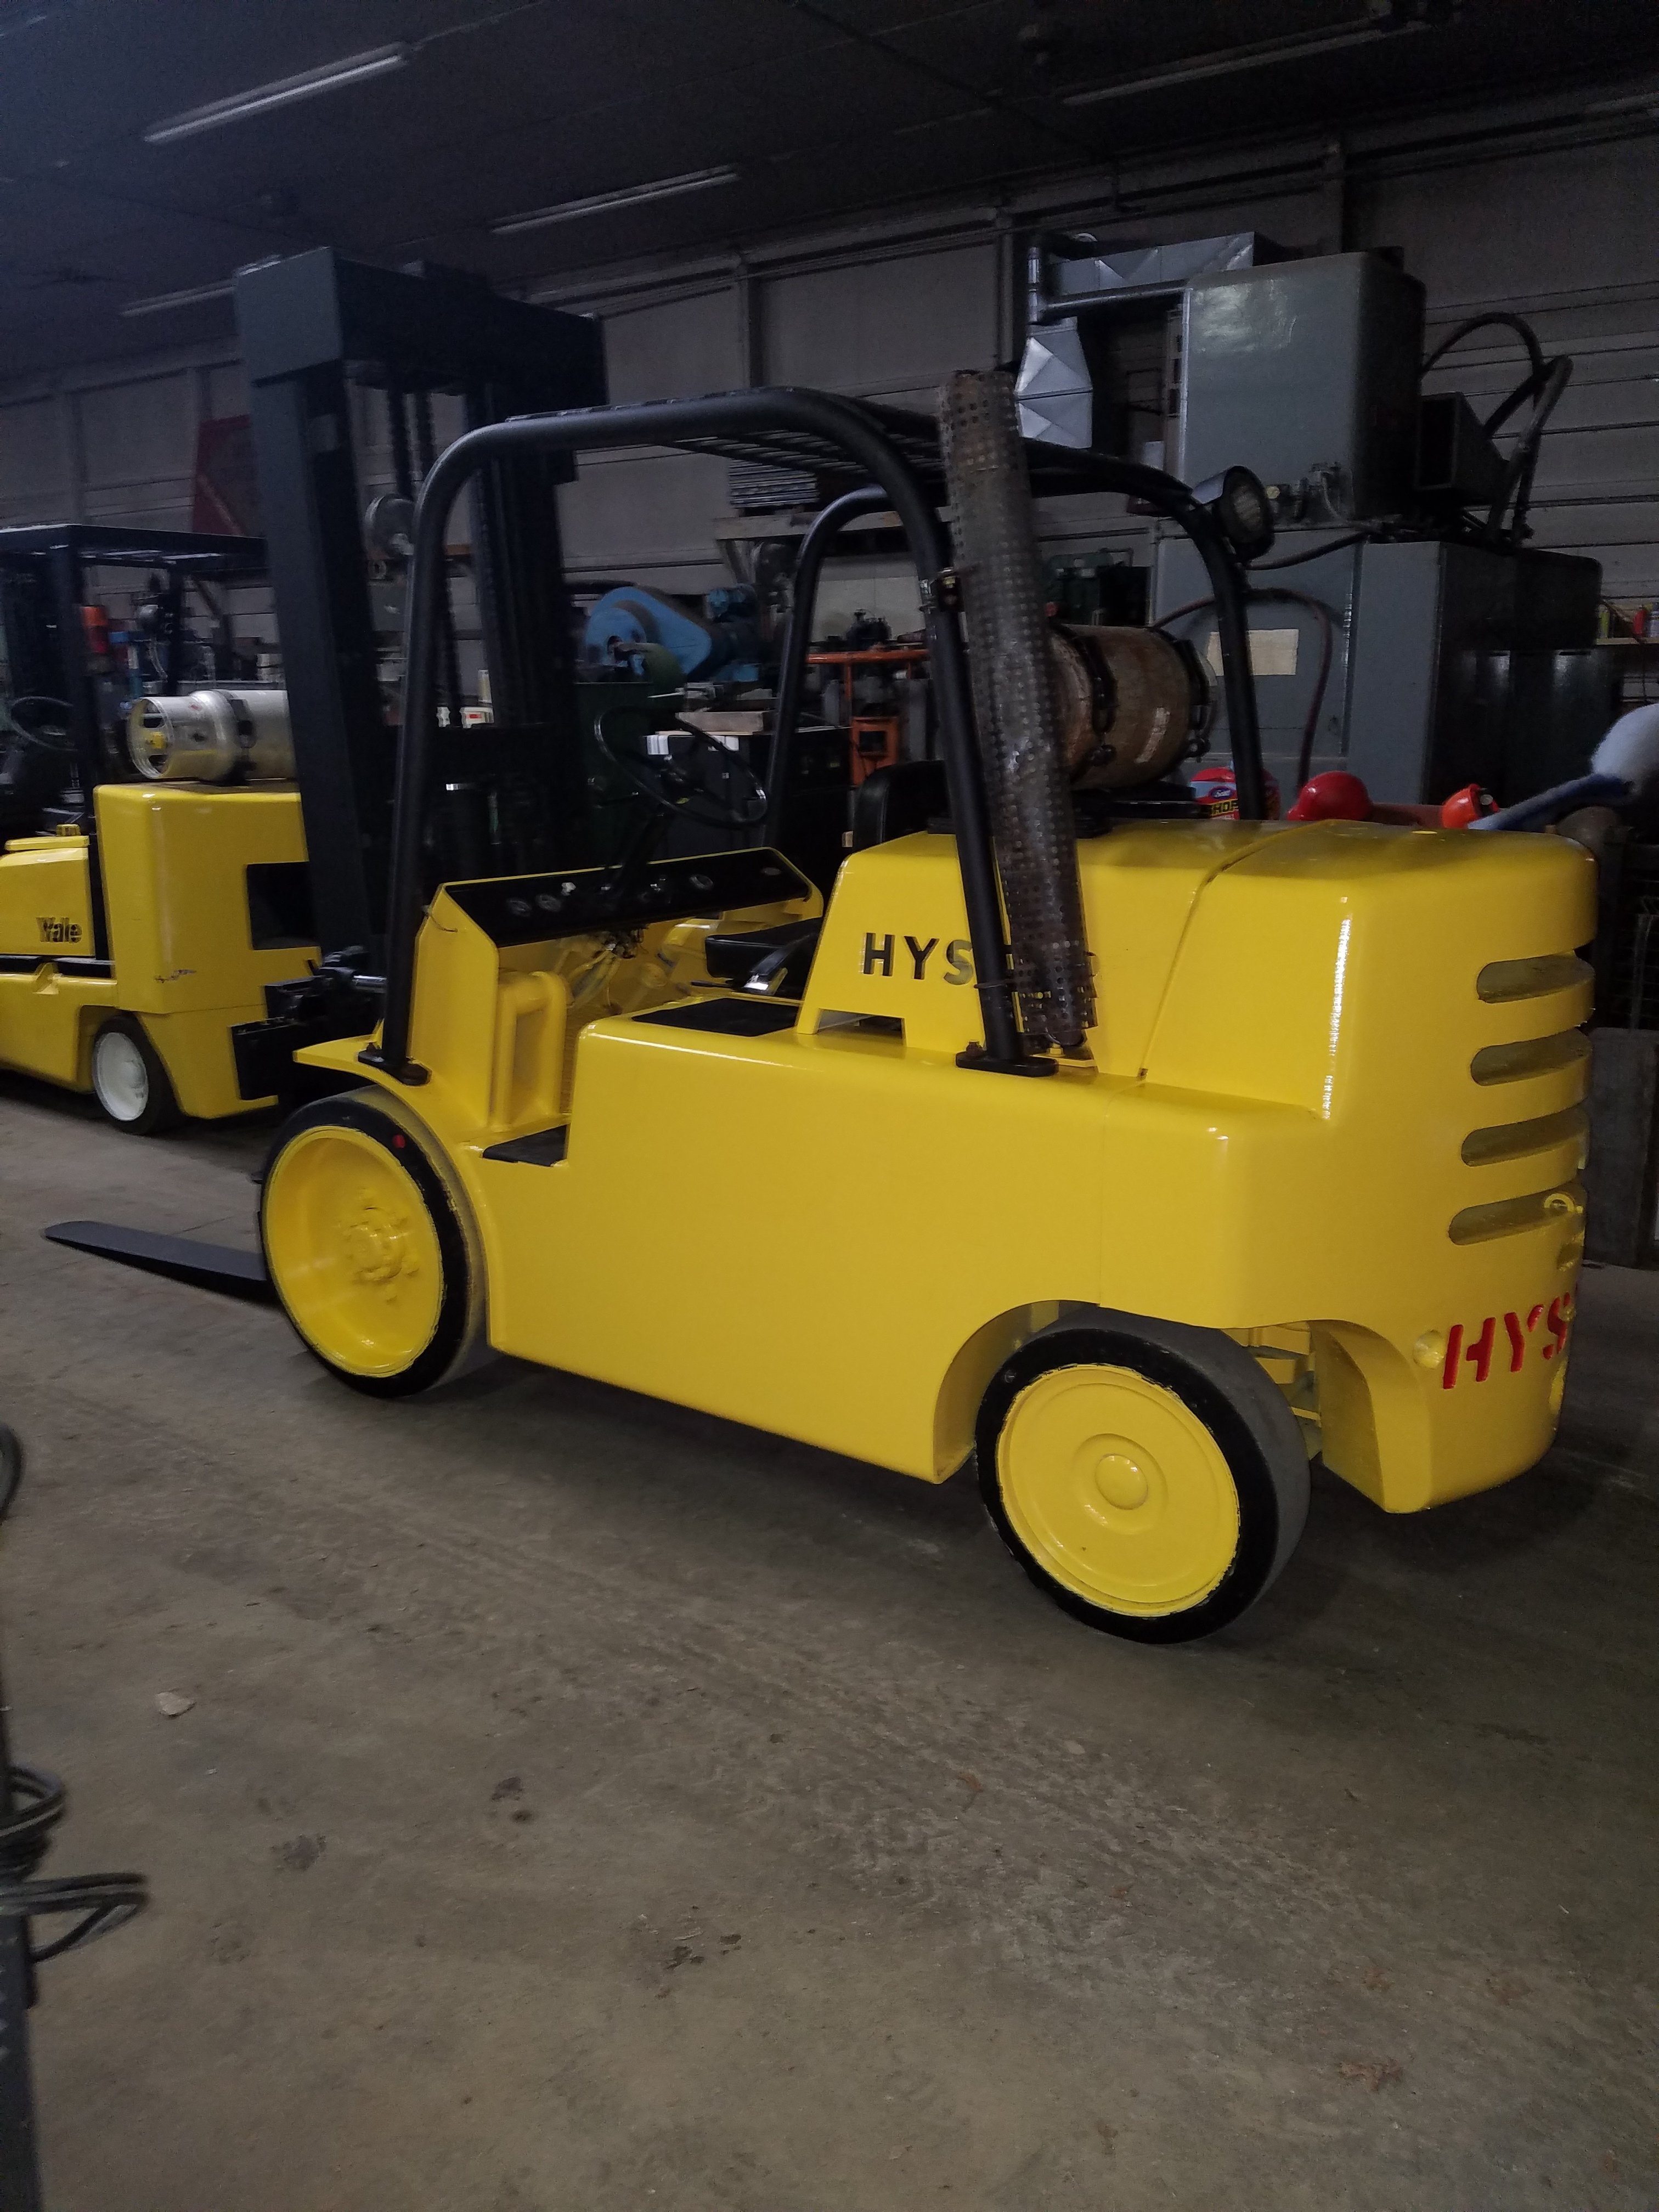 15,000lb. Capacity Hyster S-150 Forklift For Sale